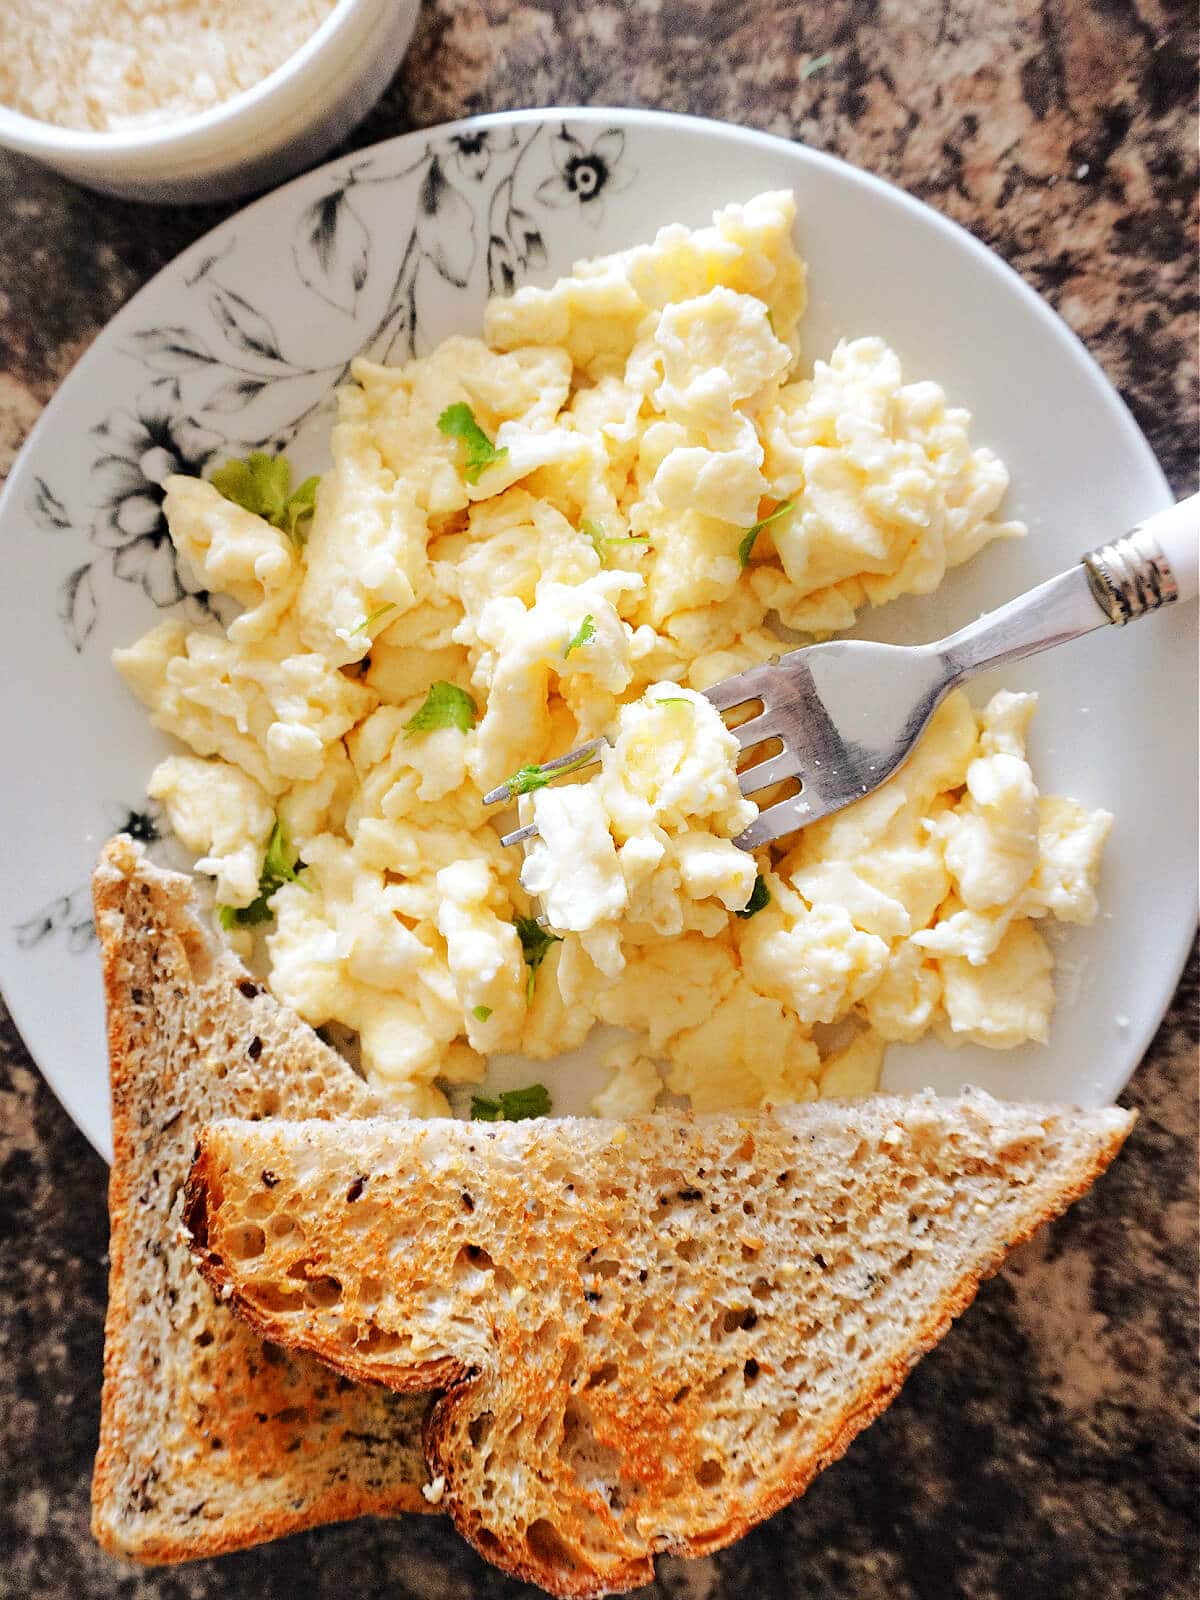 Overhead shot of a plate with scrambled eggs and 2 slices of toast